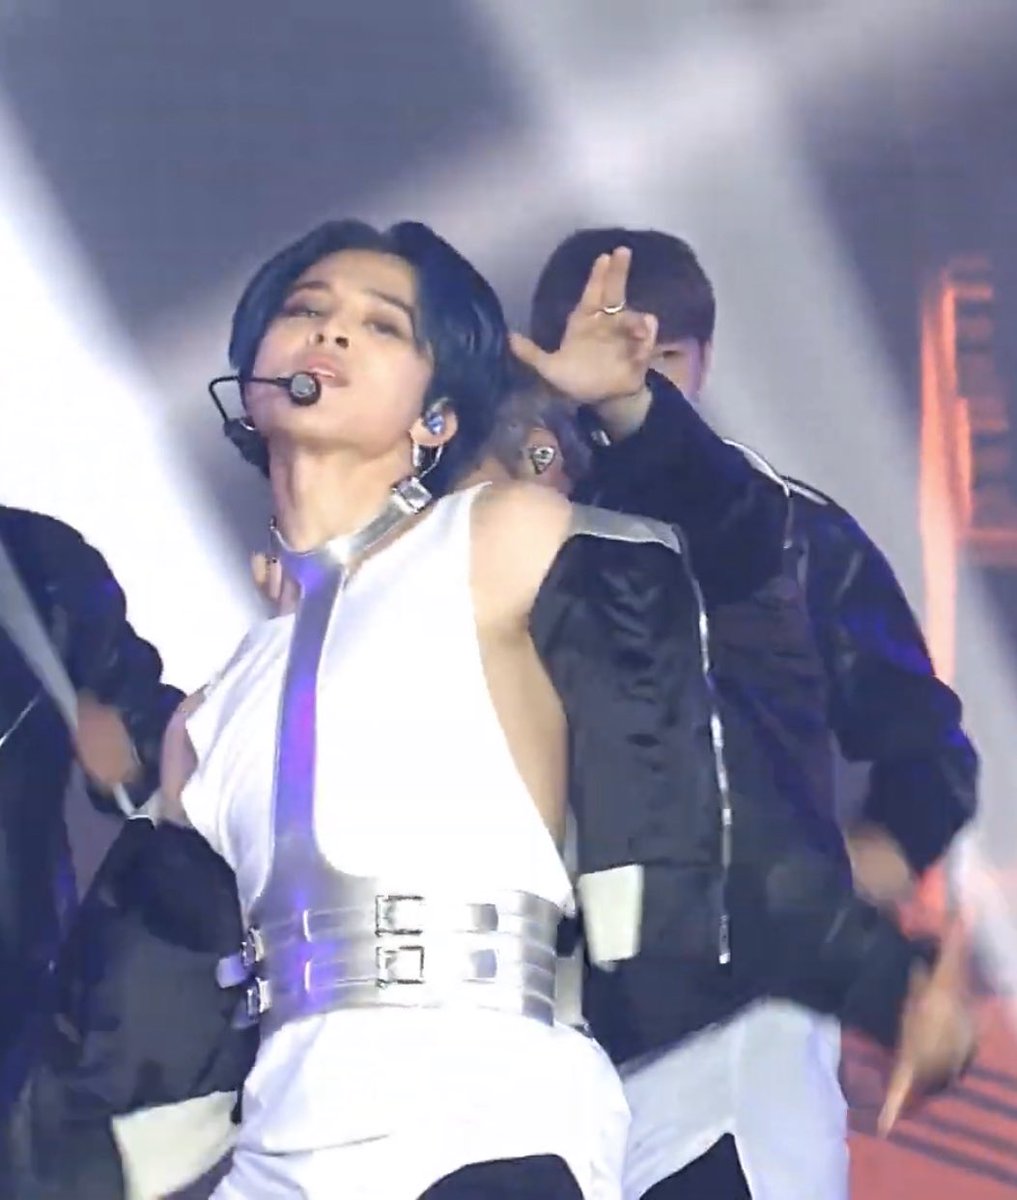 Jimin in a silver harness? Sassy Left Shoulder coming to play? Hard Stans getting rekked?  #JIMIN  #BTS    #BTSARMY    @BTS_twt